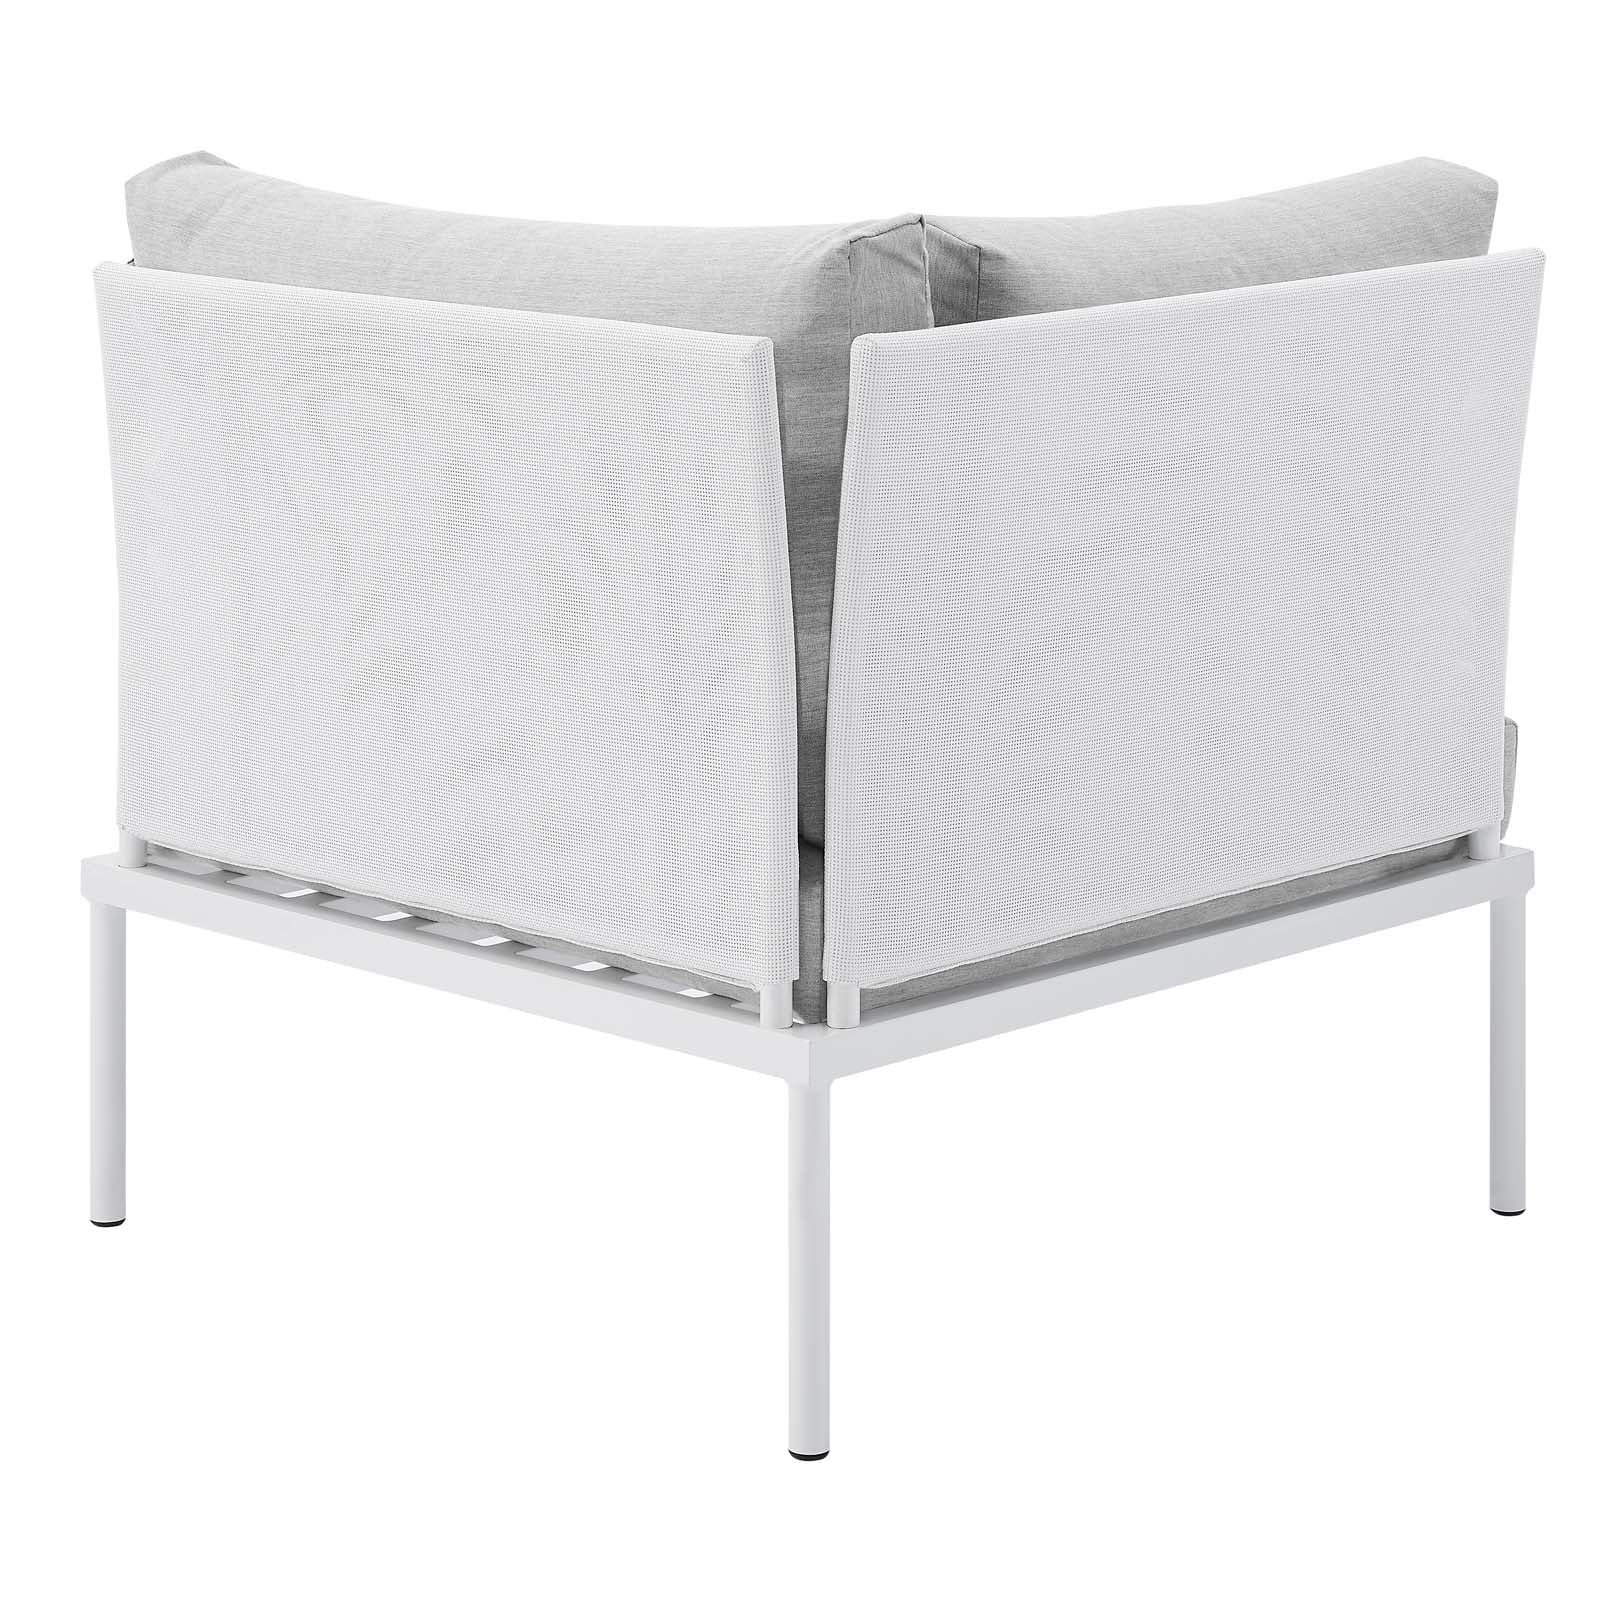 Modway Outdoor Chairs - Harmony Sunbrella Outdoor Patio All Mesh Corner Chair White Gray